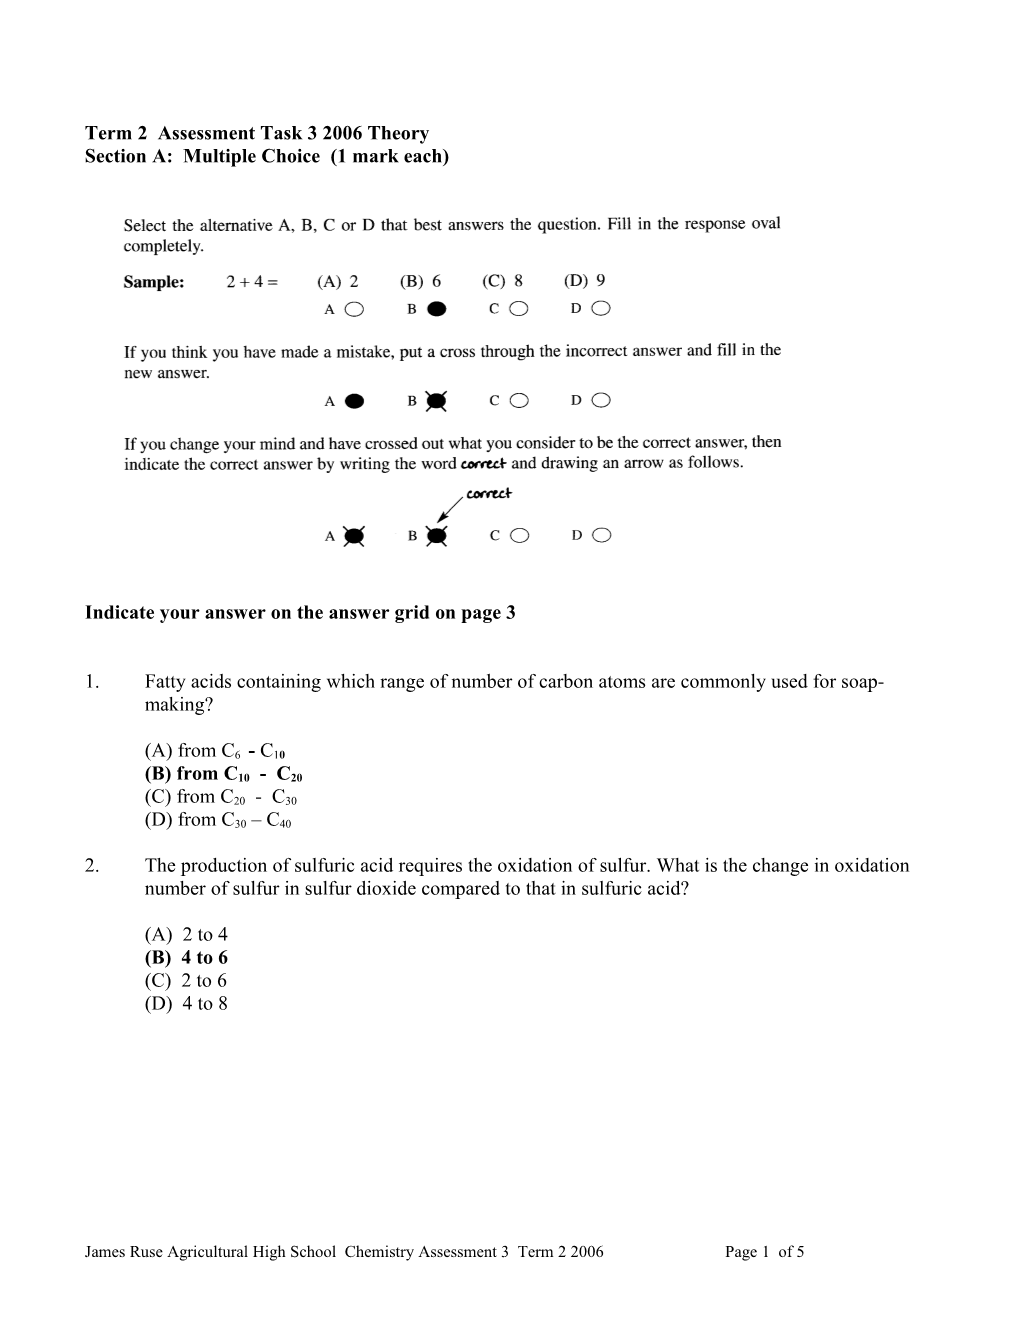 Term 2 Assessment Task 2006 Theory